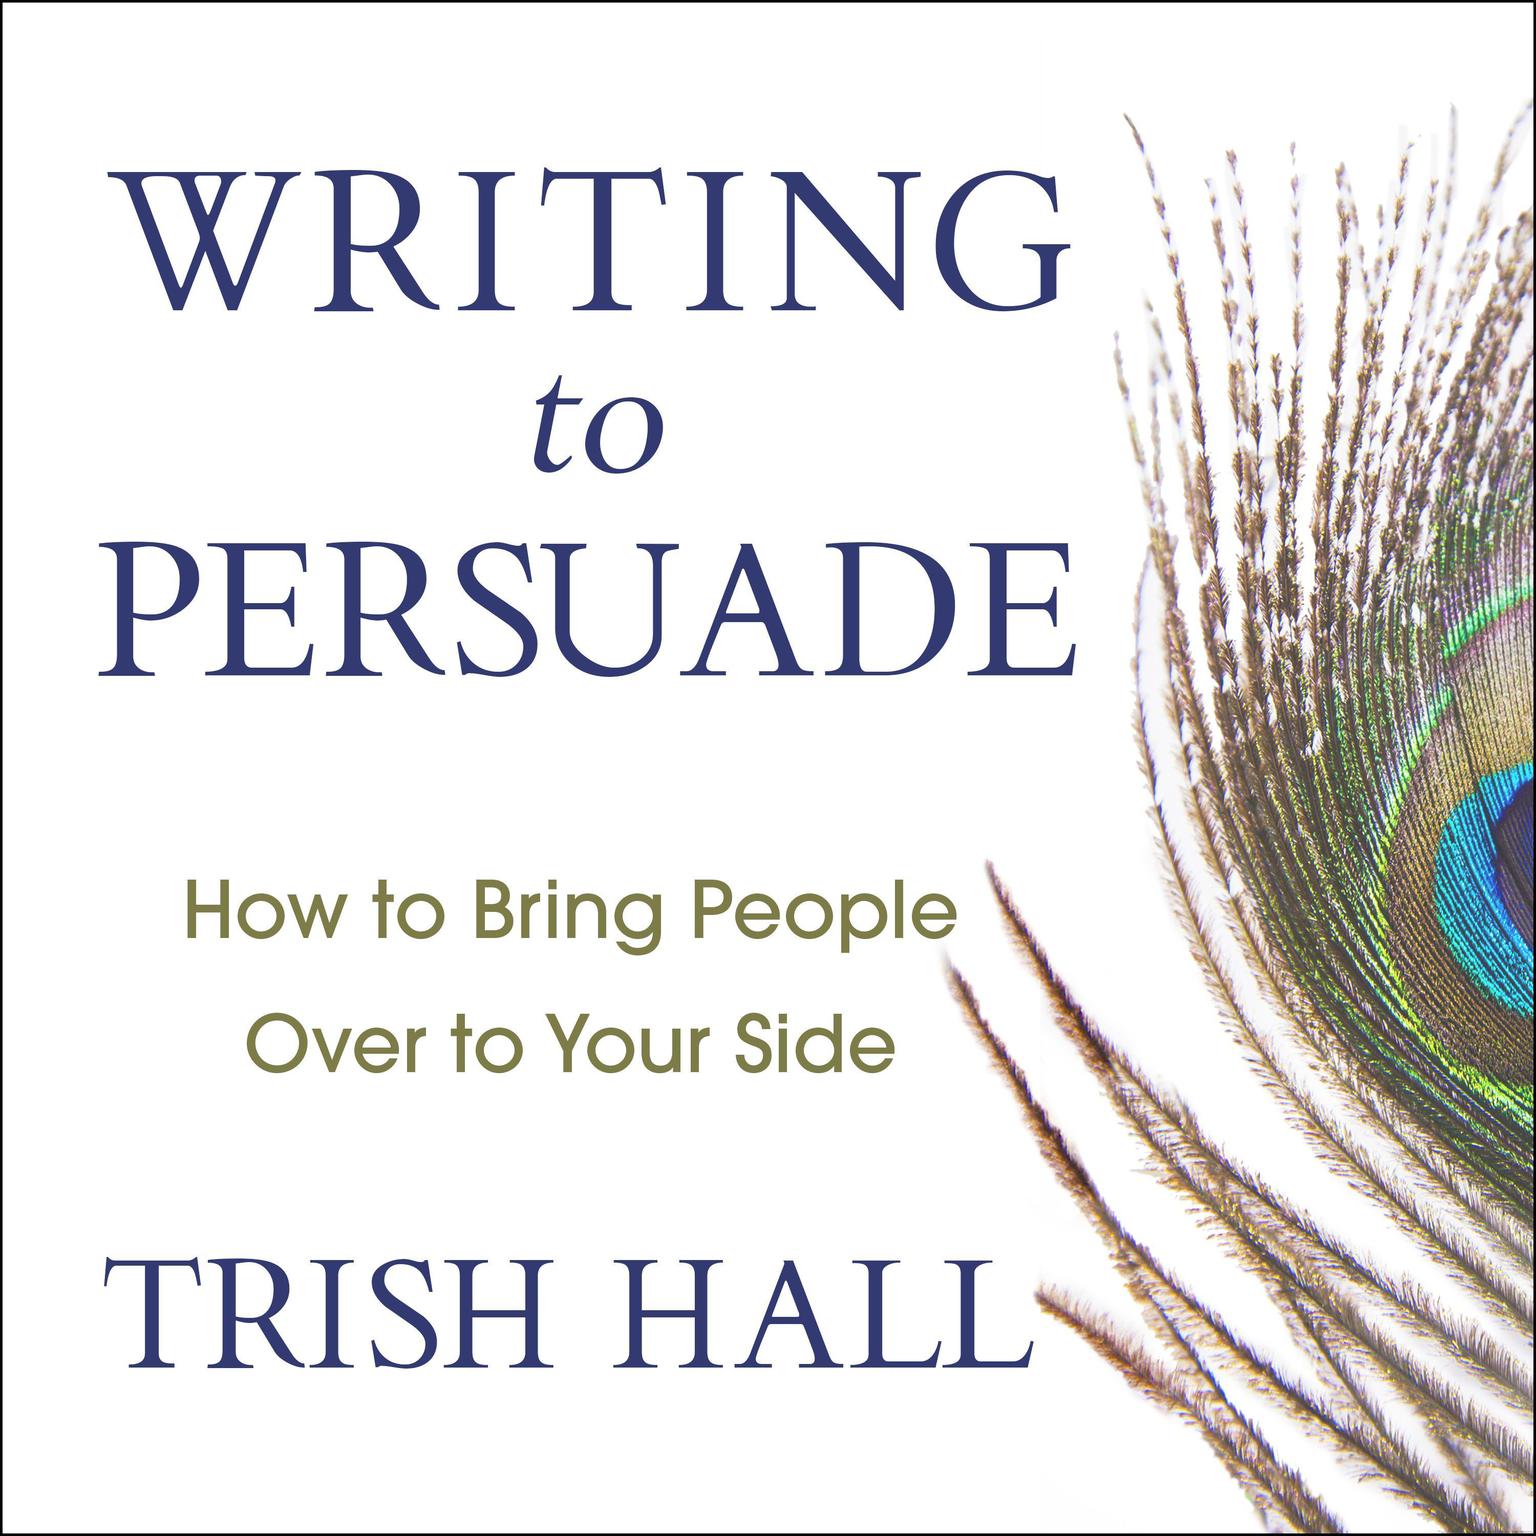 Writing to Persuade: How to Bring People Over to Your Side Audiobook, by Trish Hall